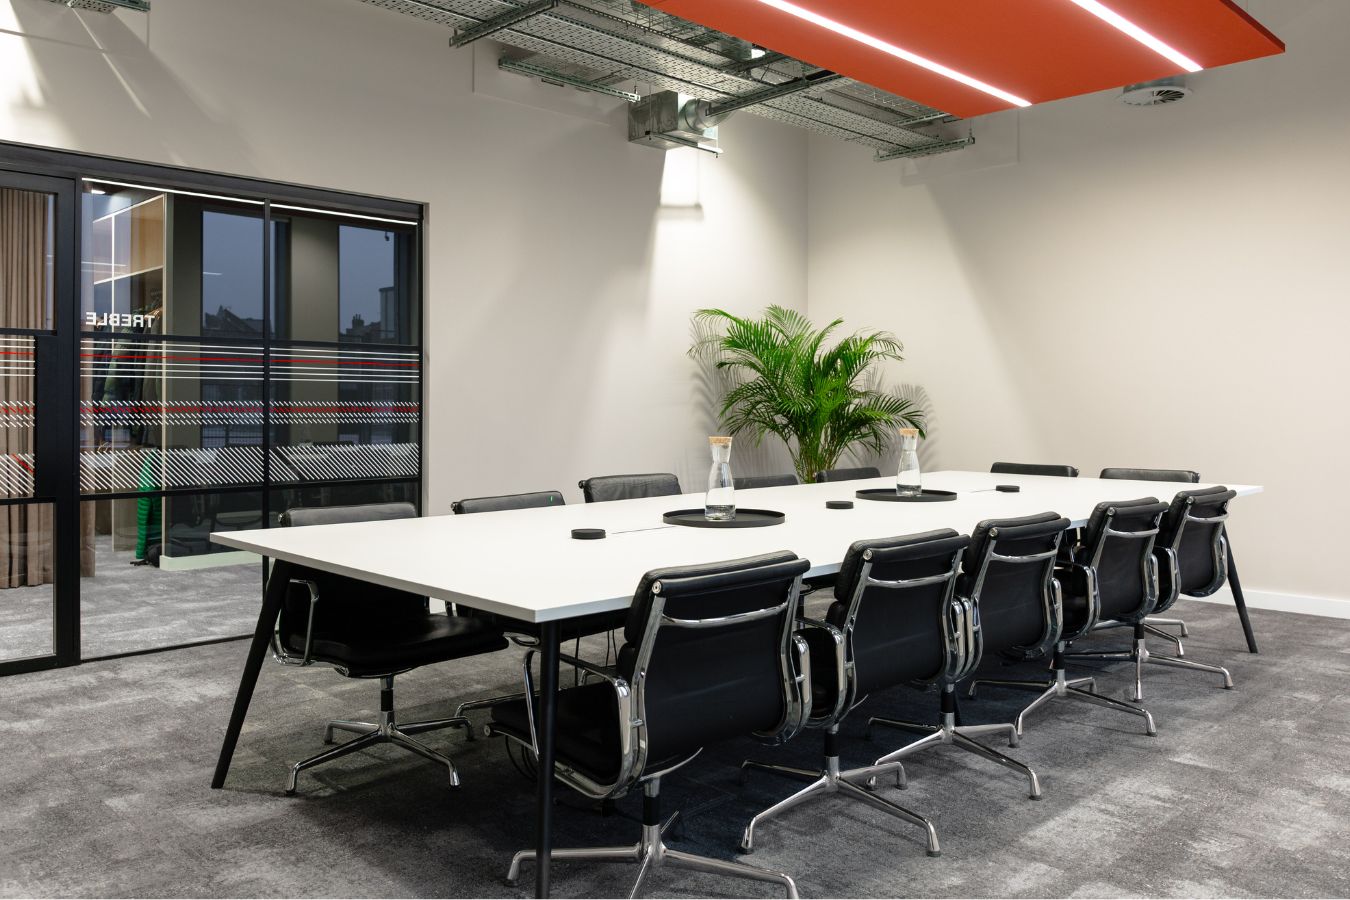 Large collaboration table in modern conference meeting room decorated with plants and big glass windows